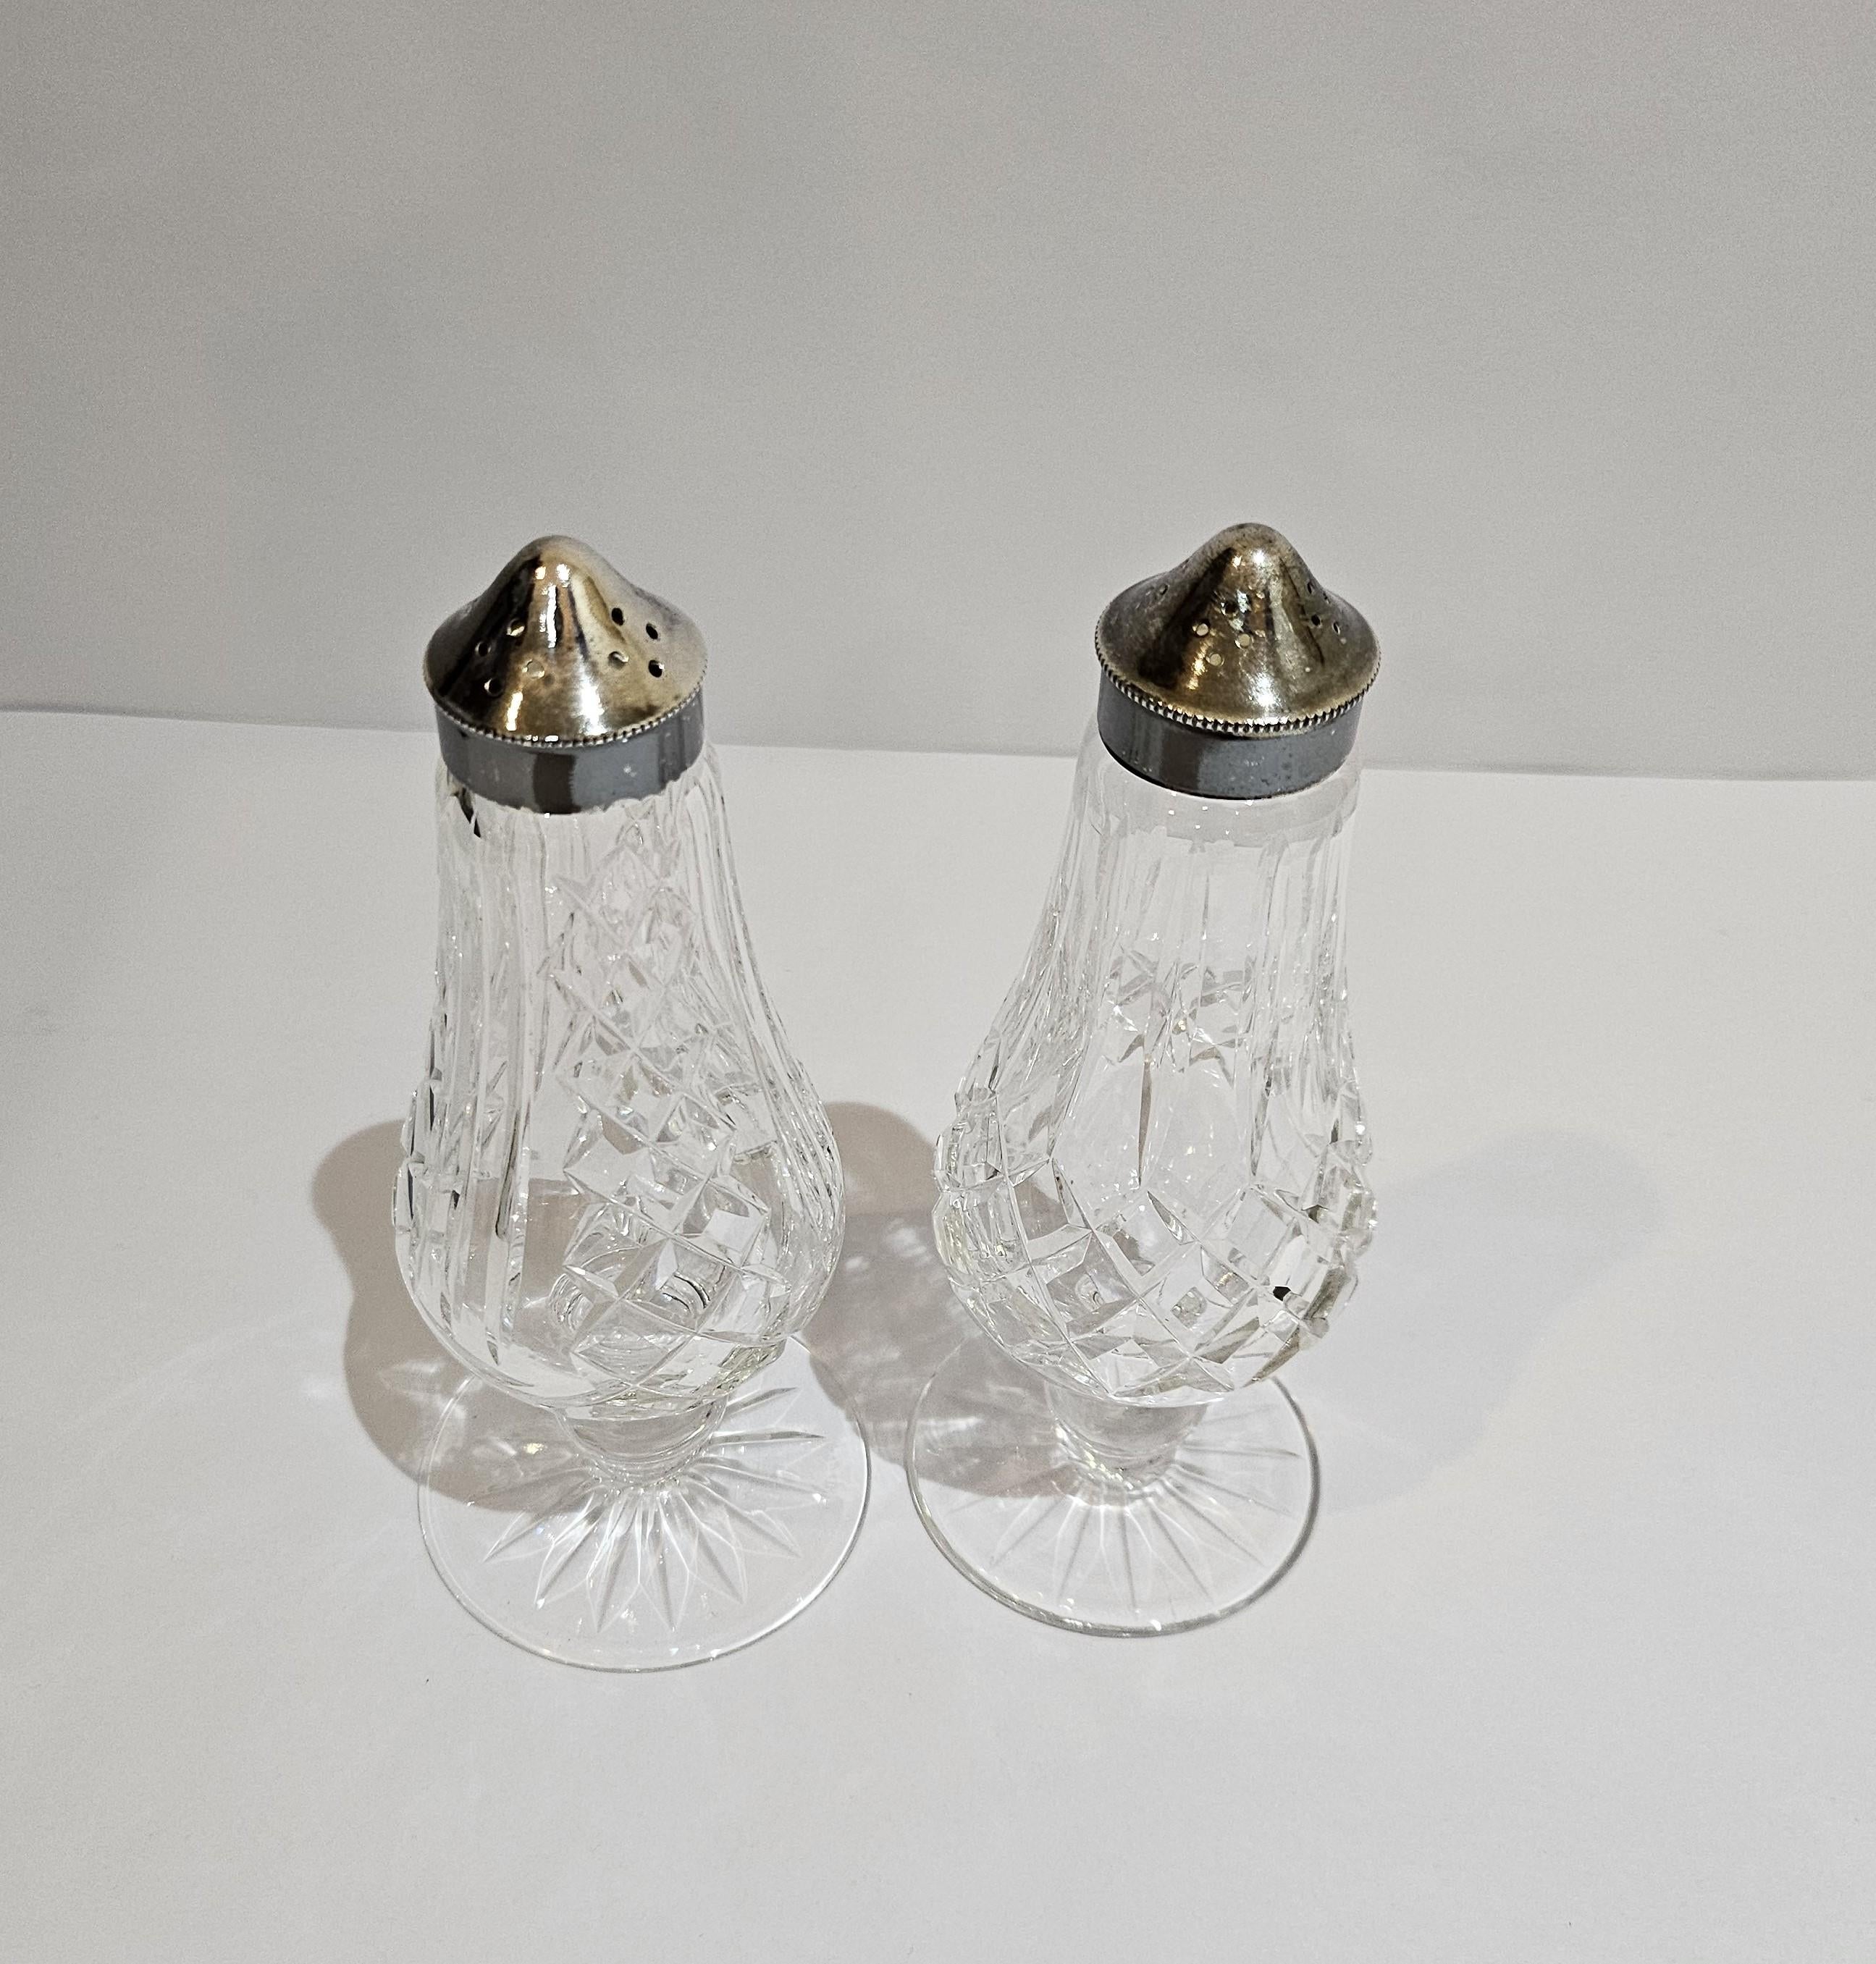 waterford salt and pepper shakers